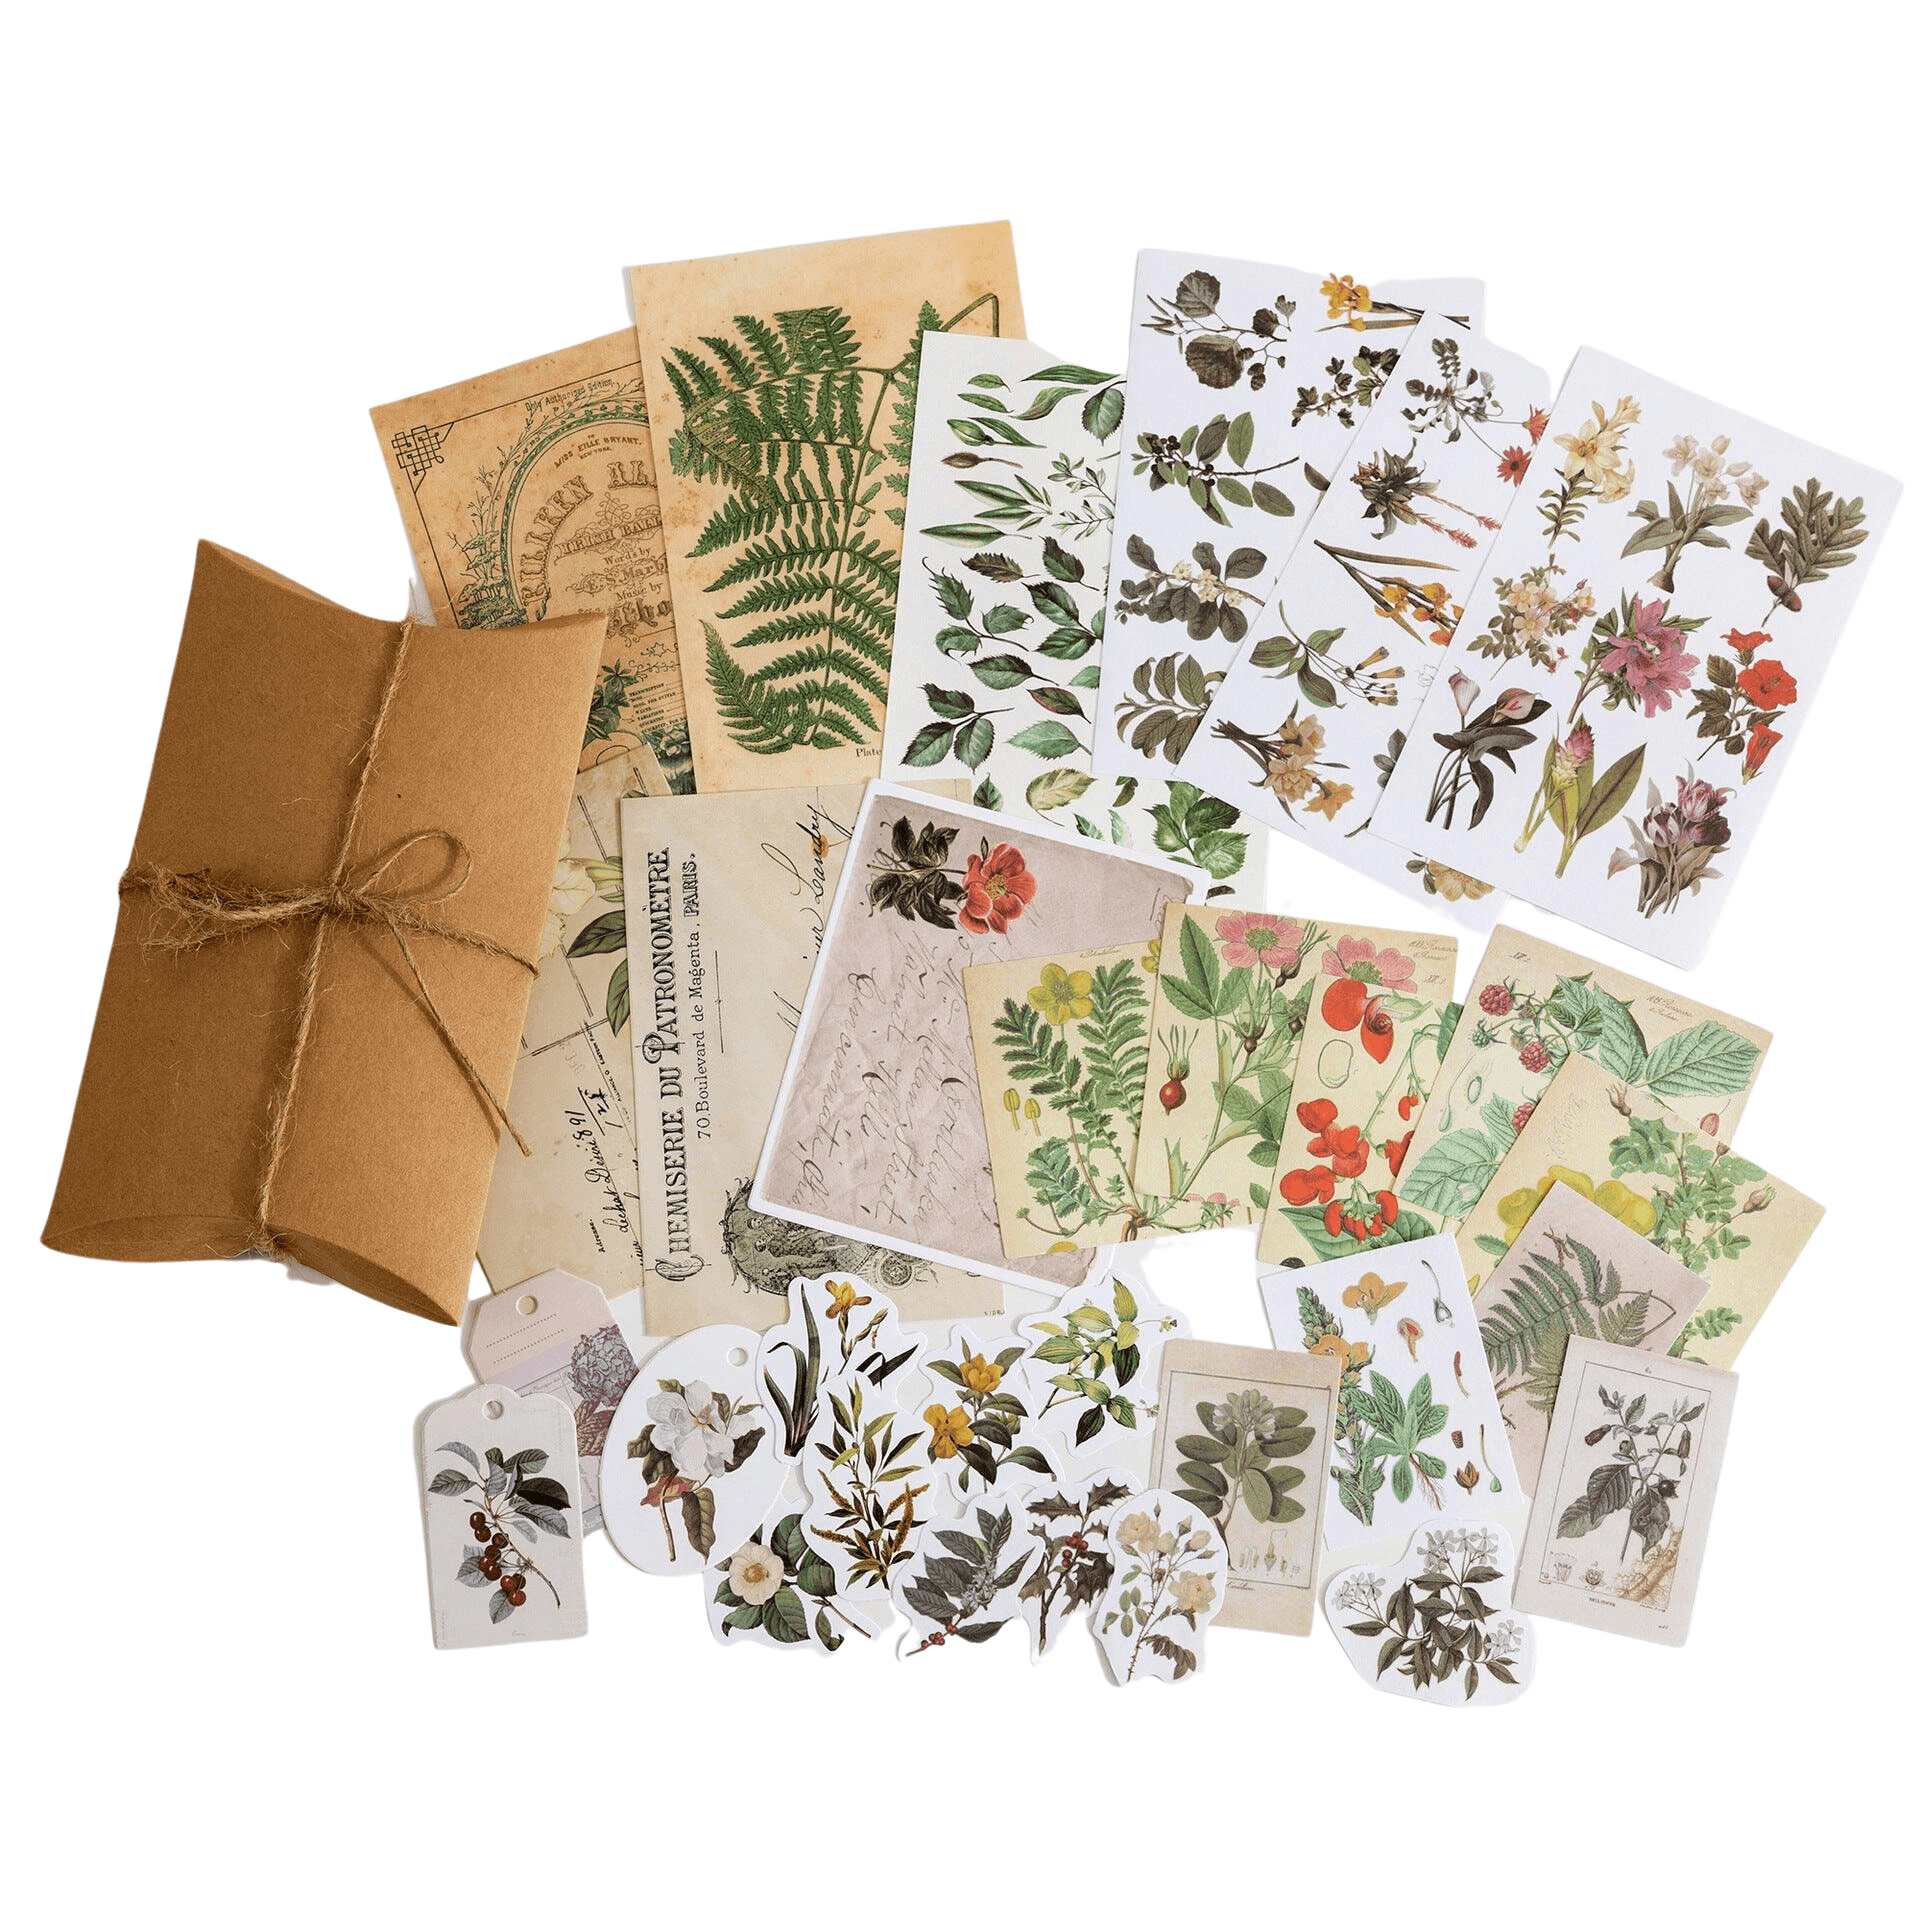  4 Sets 200 Pcs Washi Stickers Set Vintage Aesthetic Sticker  Book for Journaling Decorative Scrapbook Floral Paper Sticker Kit for  Scrapbooking , Bullet Journal, Art Craft Gifts, NoteBook Making : Office  Products